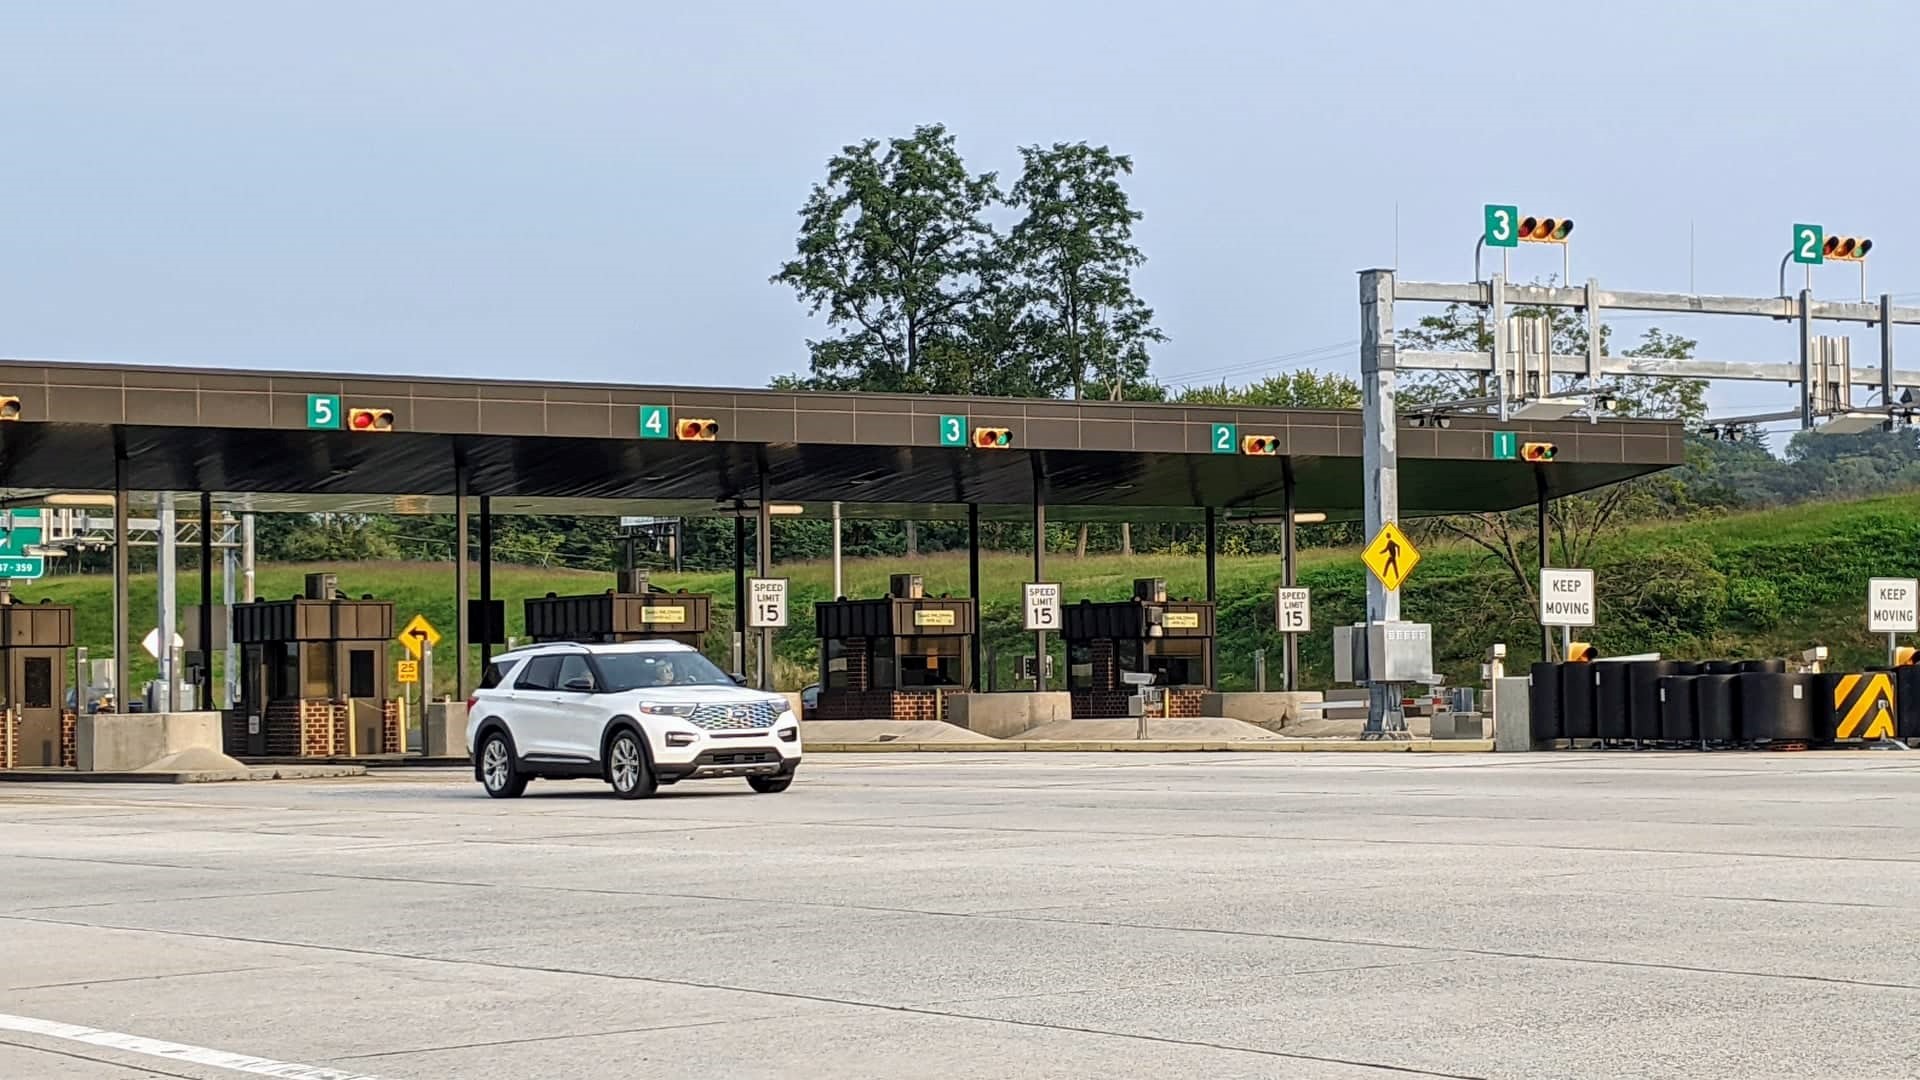 About half of Turnpike users who do not use E-Z Pass don't end up paying for their ride, according to data shared by the Turnpike Commission.